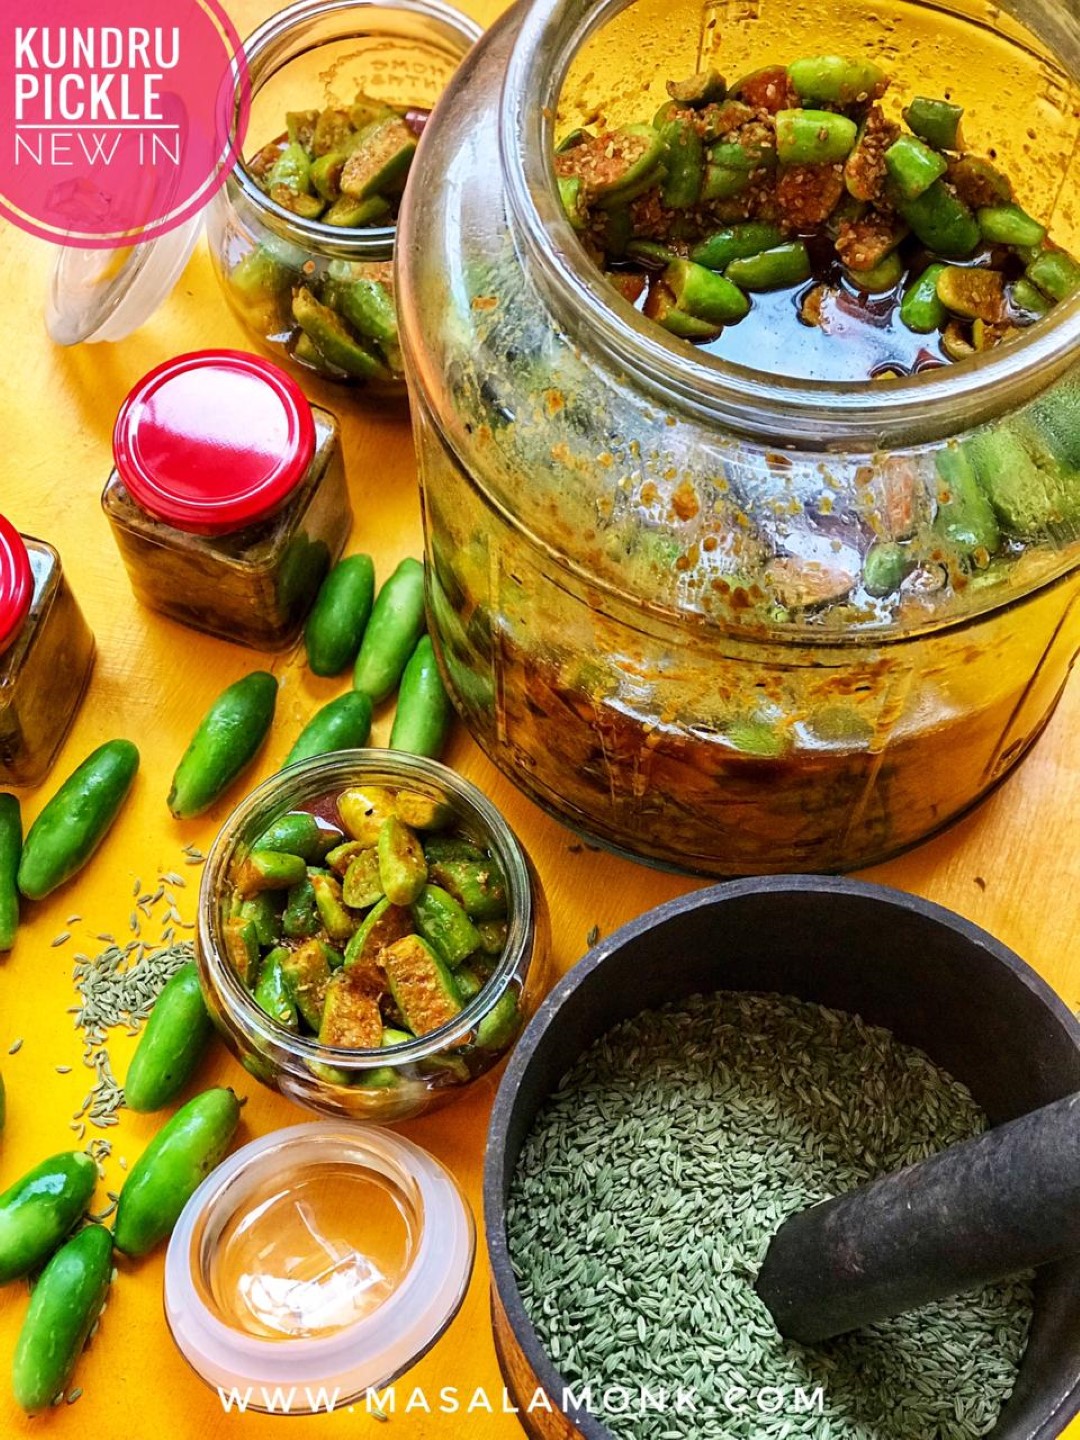 Spicy, tangy yet sweet and flavorful Kundru Pickle